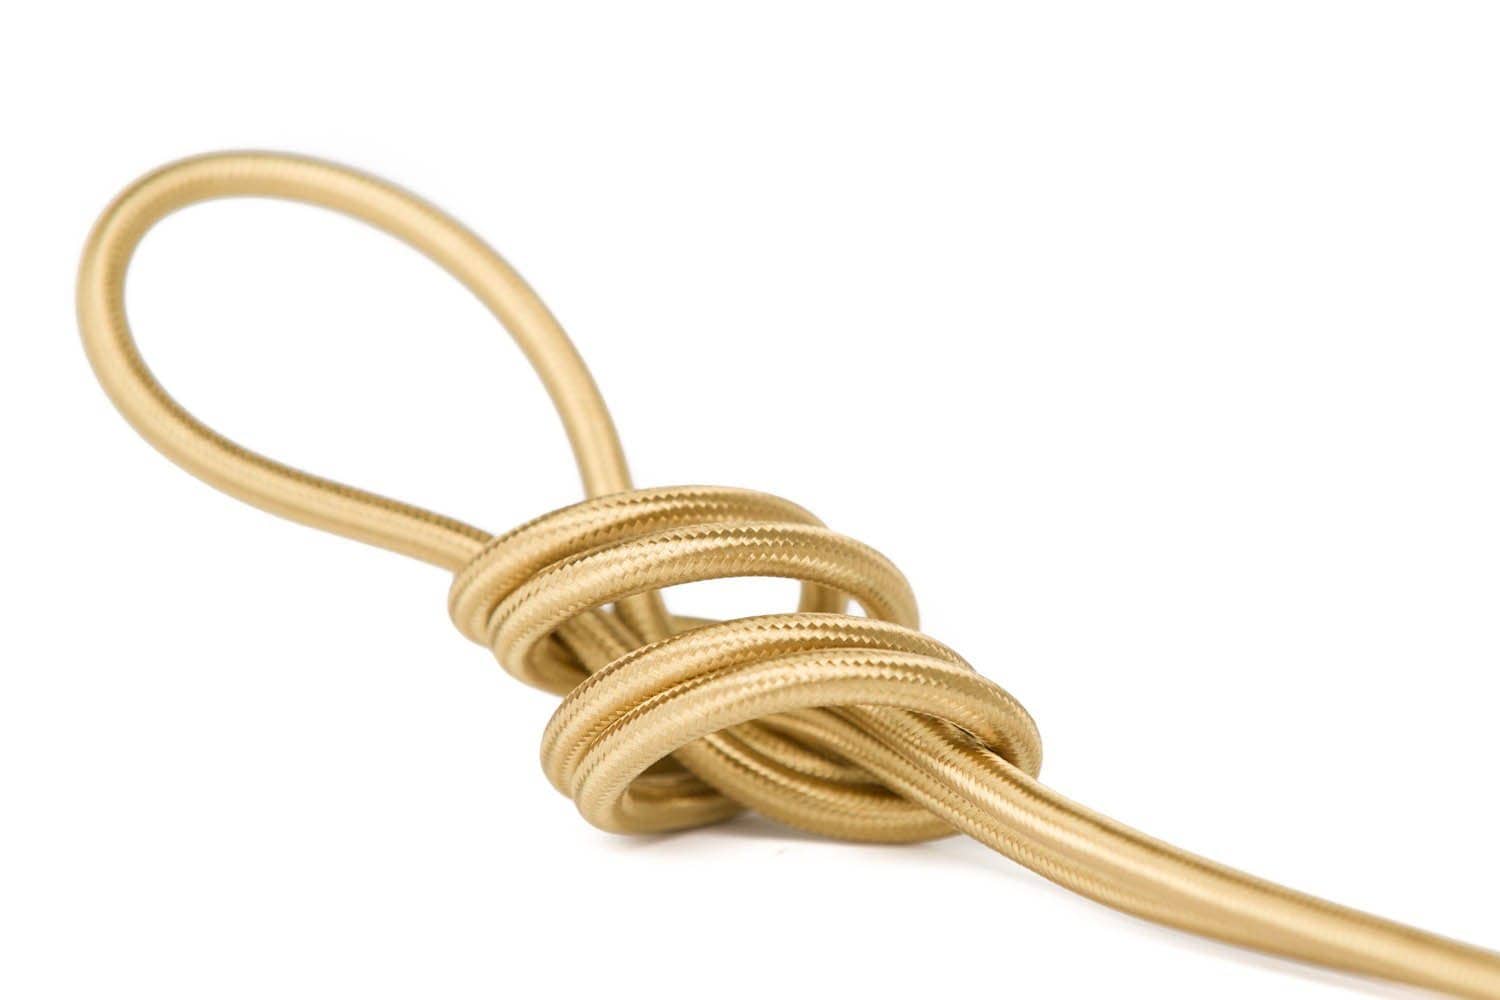 Brass Metal Braided Cord - Round 3-Wire Cable - PER FOOT